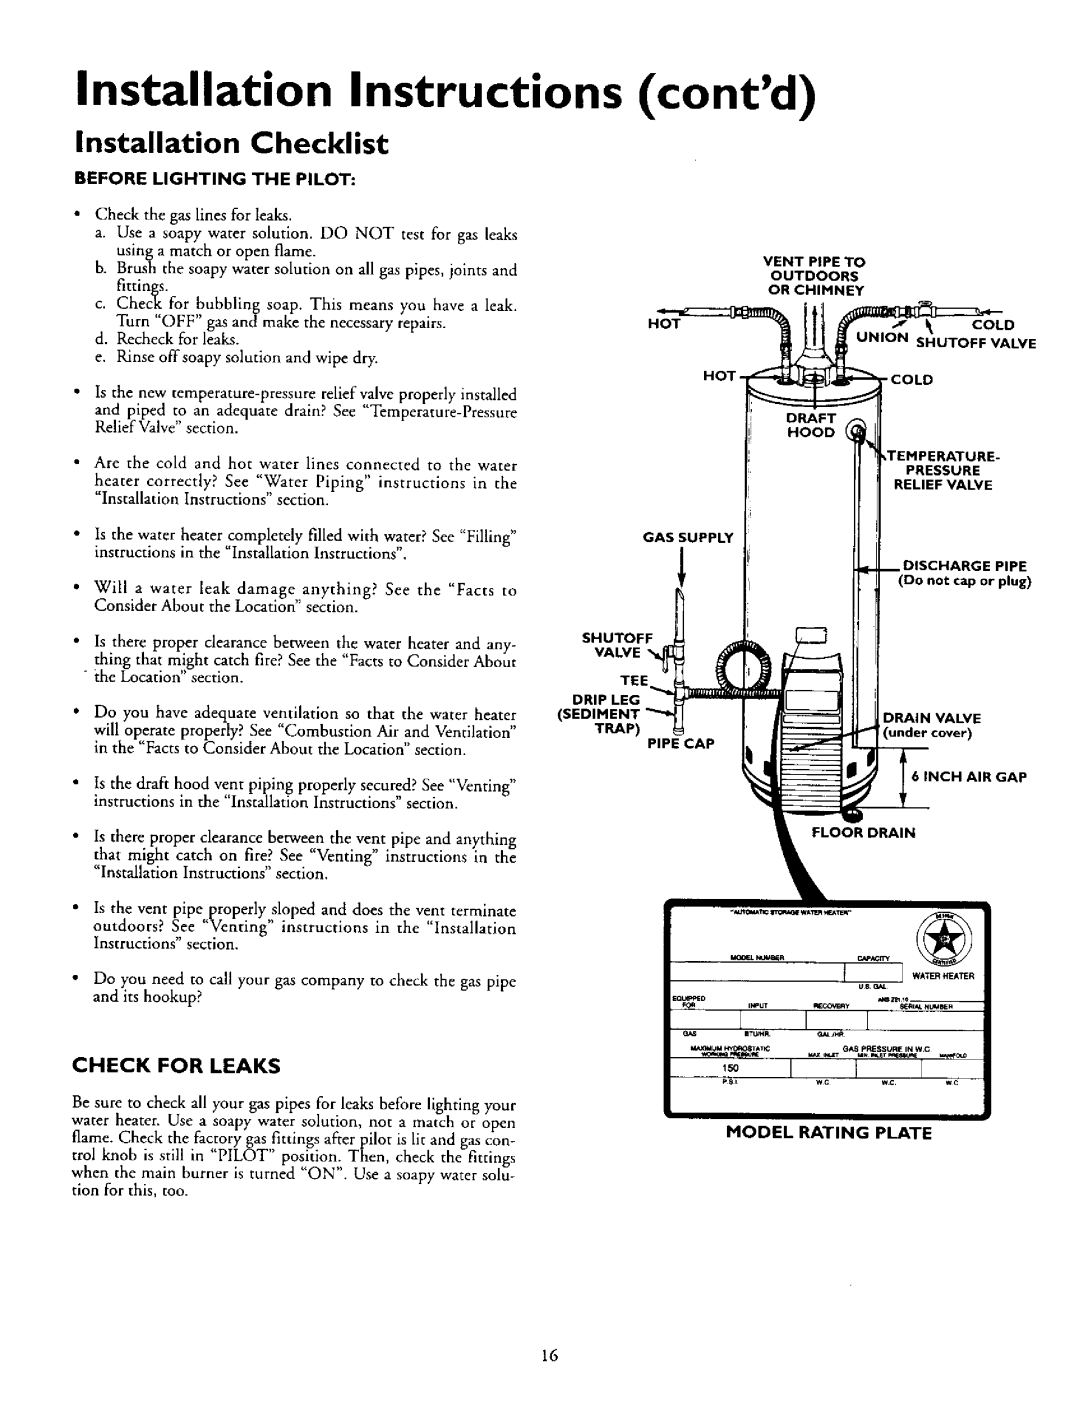 Kenmore 153.330752 Installation Checklist, Installation Instructions contd, Before Lighting The Pilot, Check For Leaks 